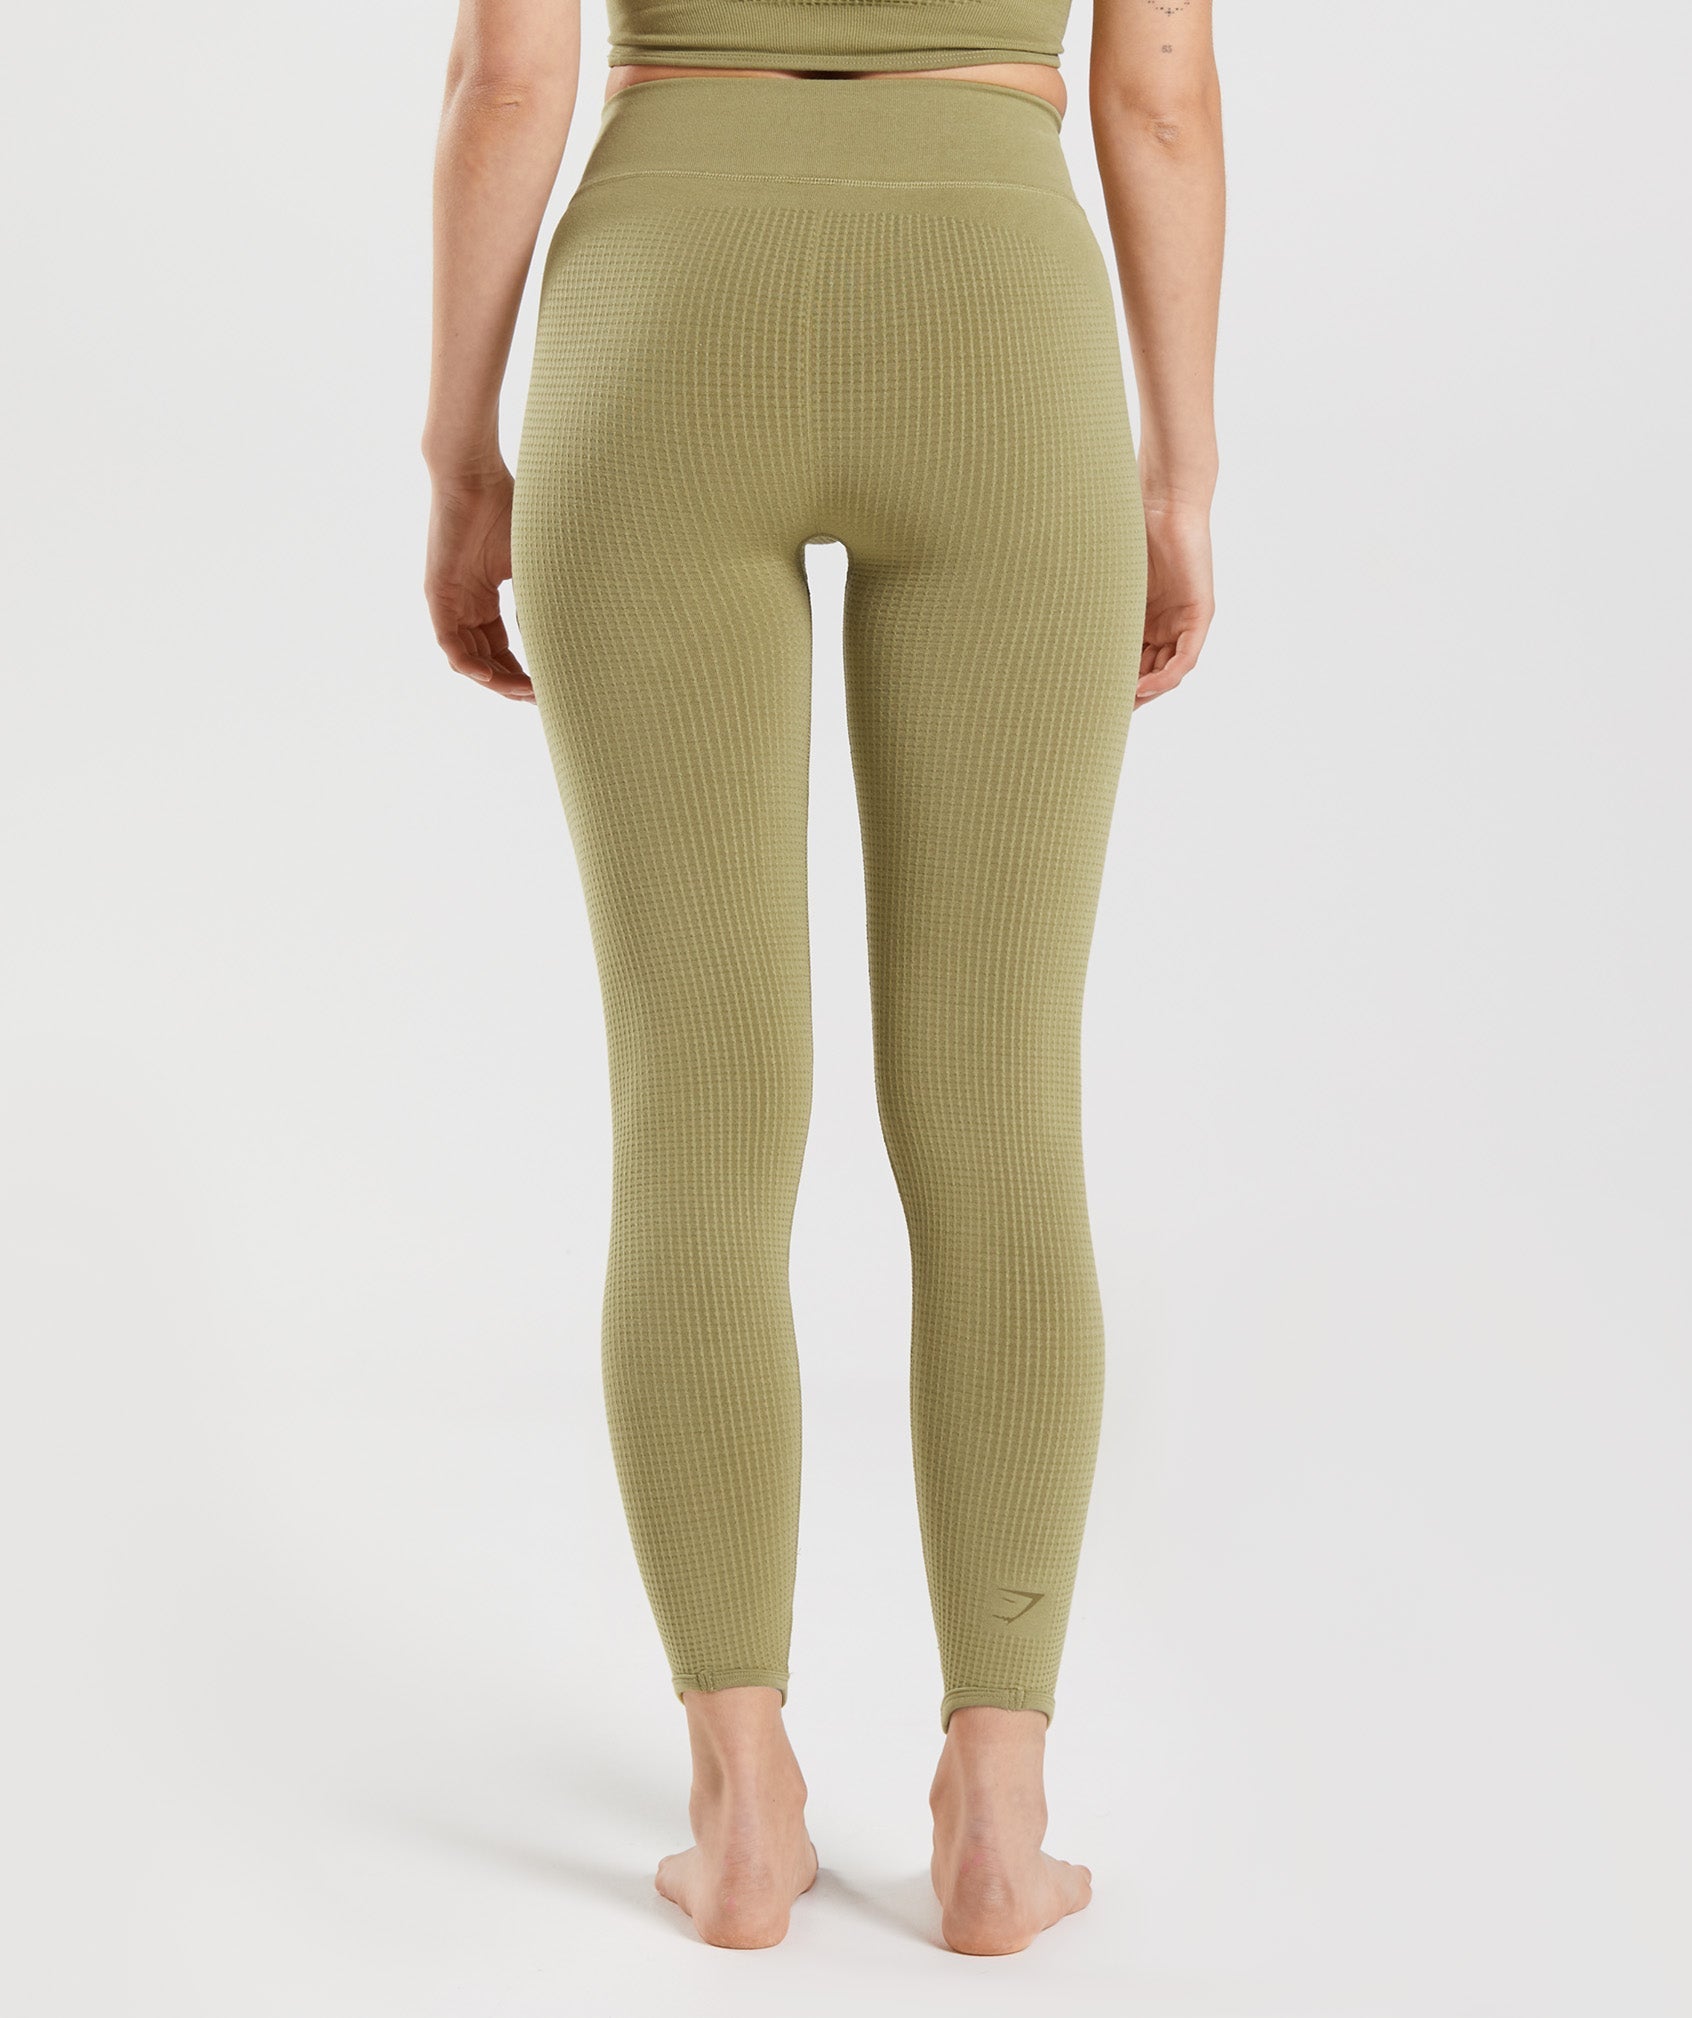 Pause Seamless Leggings in Griffin Green